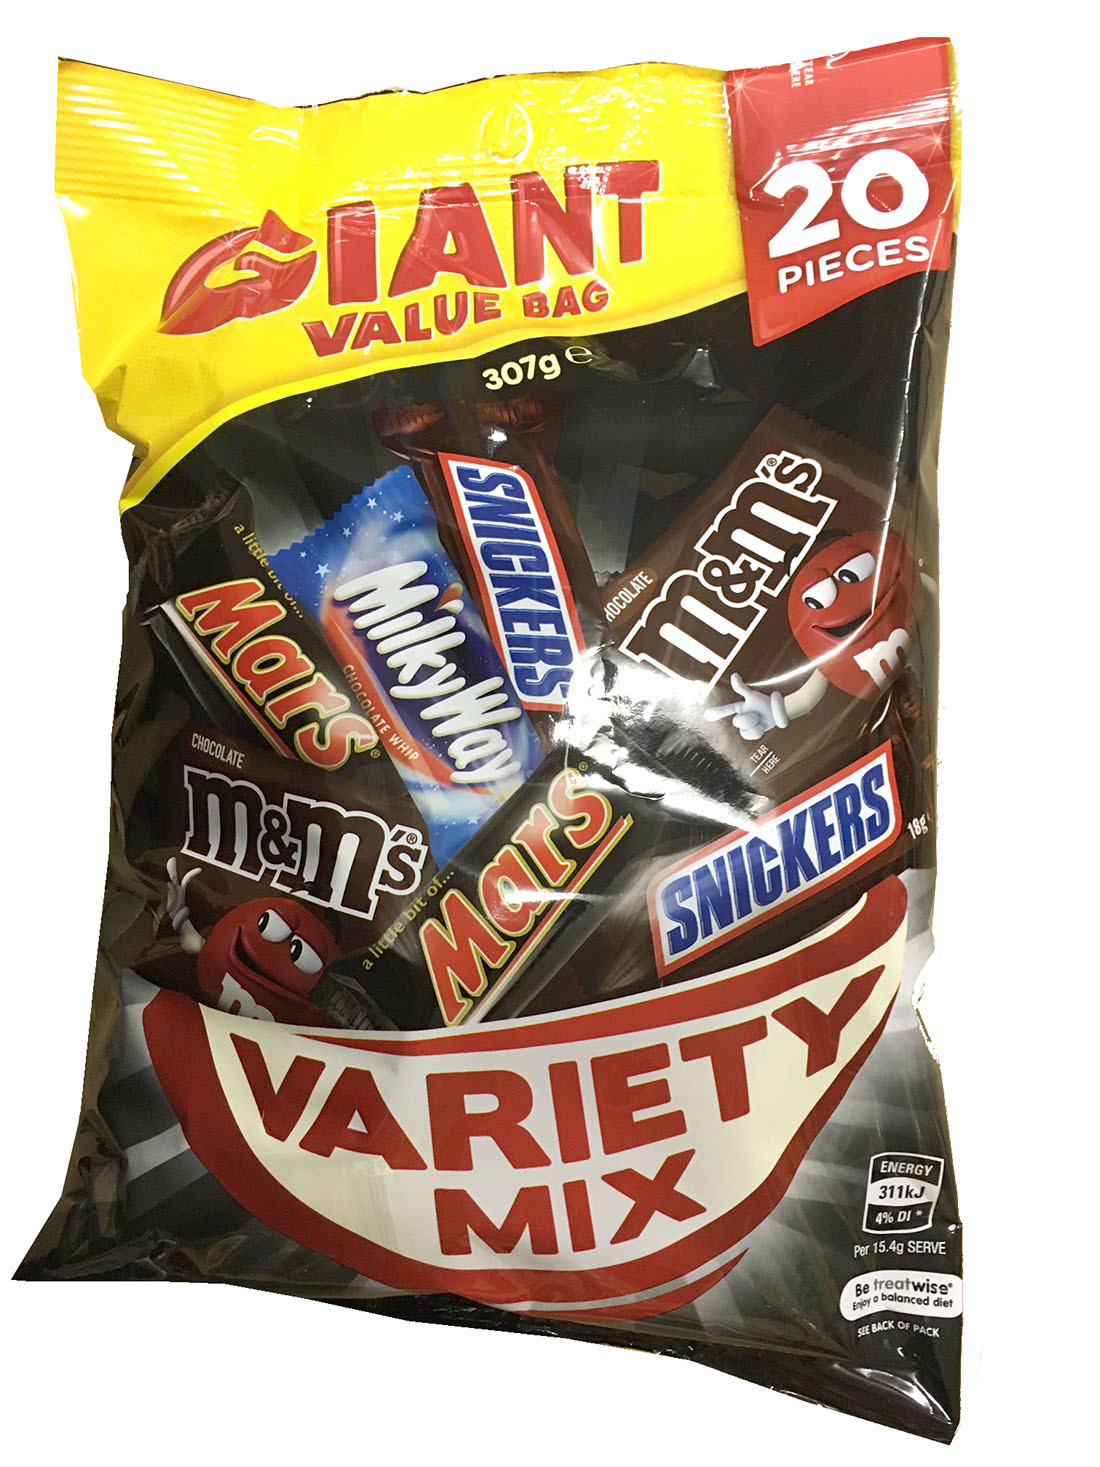 12 x Mars Giant Value Bag 307g 240 Pieces Variety Mix - (Carton of 12 Bags)